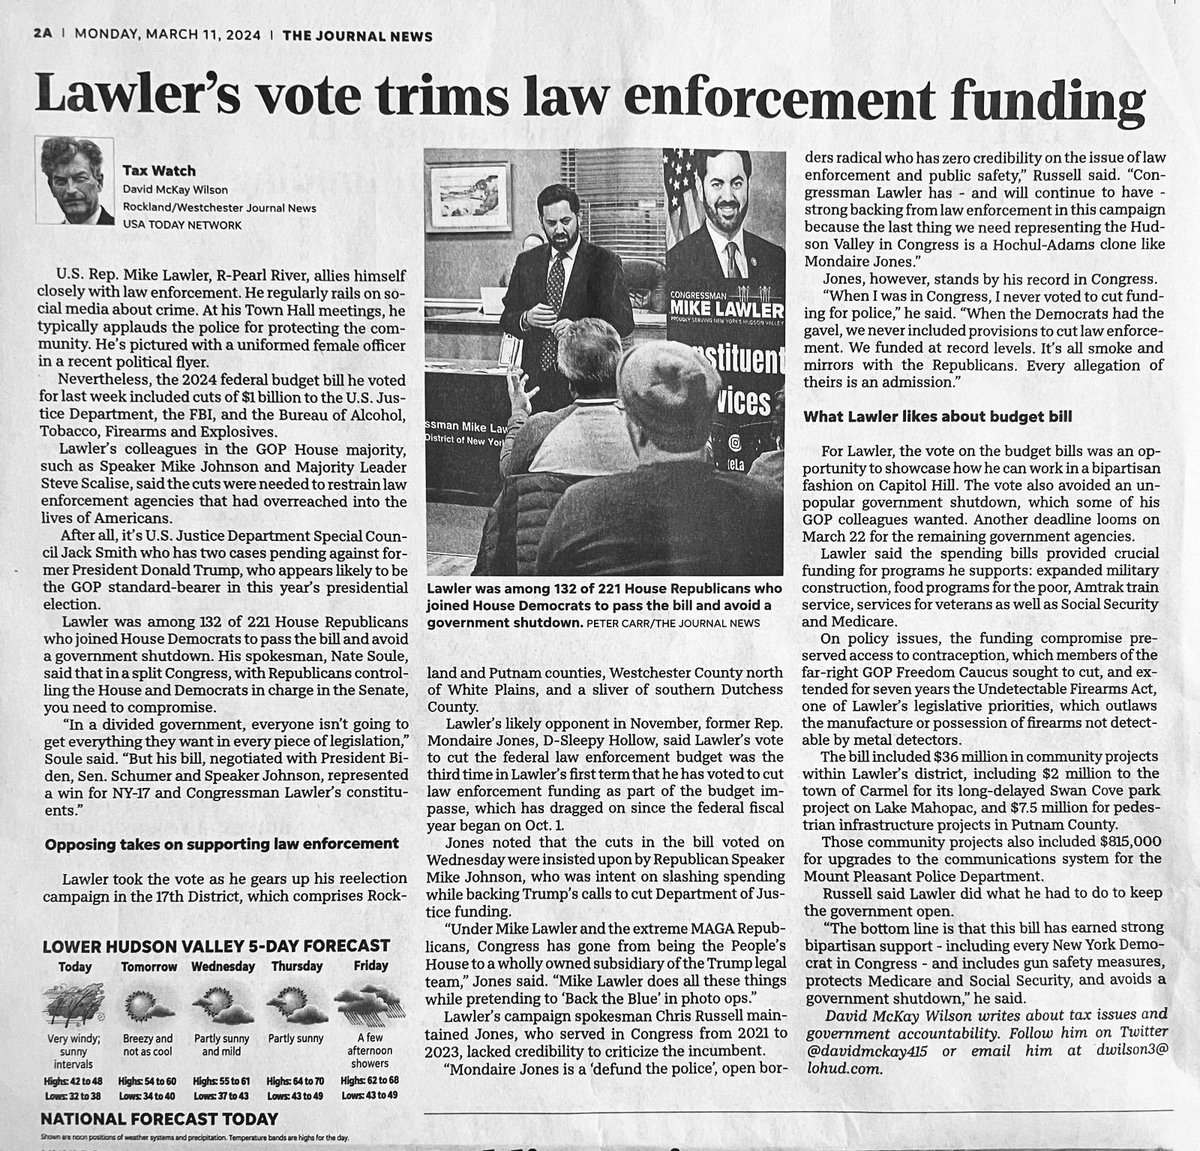 Mike Lawler supports a man for President with 88 felony counts against him, who incited a violent insurrection on January 6th that caused grave harm to law enforcement. Lawler has also voted multiple times to cut law enforcement funding, including this year. So he’s full of shit.